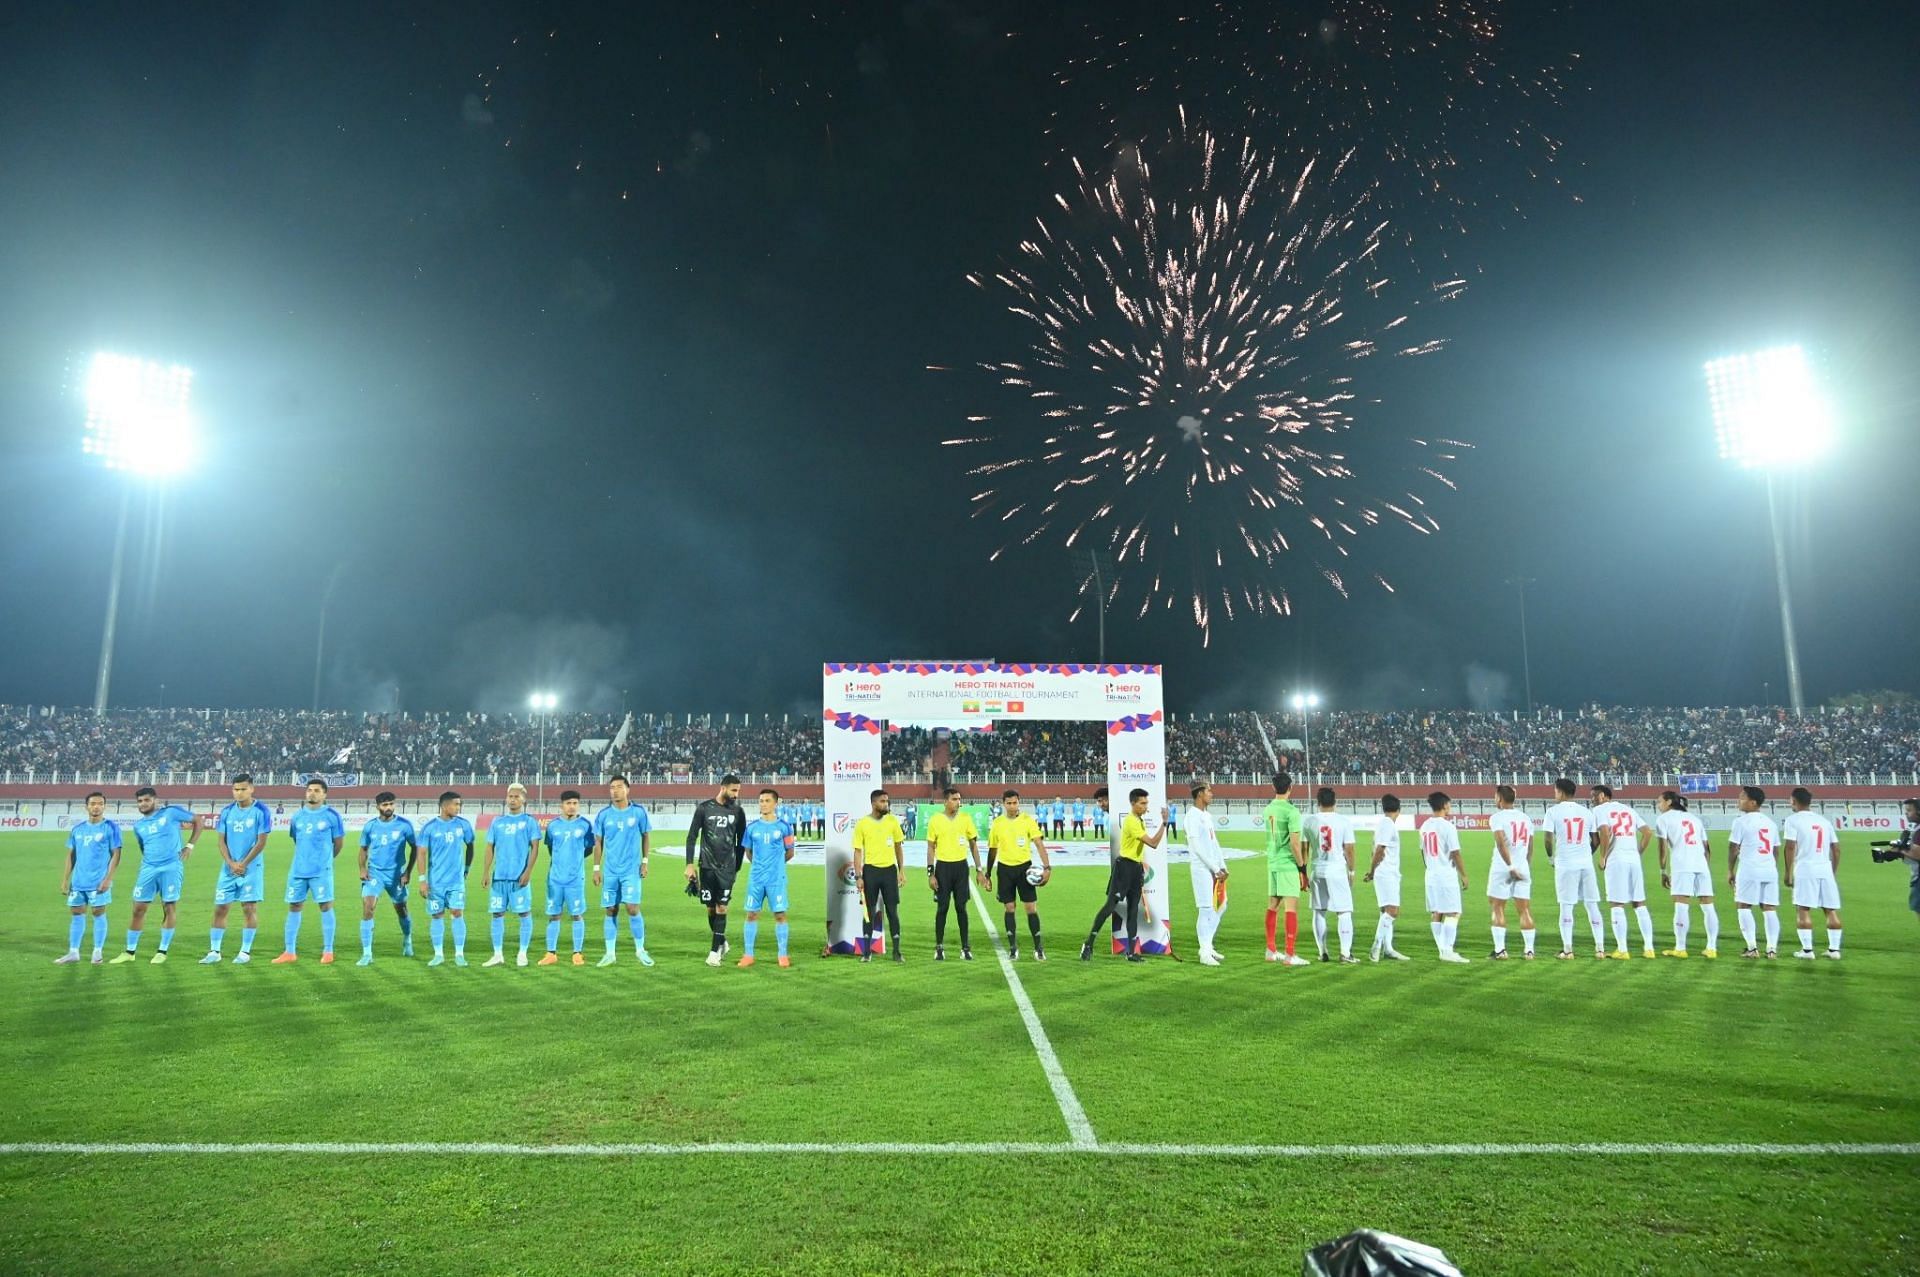 It was the first international game in Manipur (Image courtesy: AIFF media)